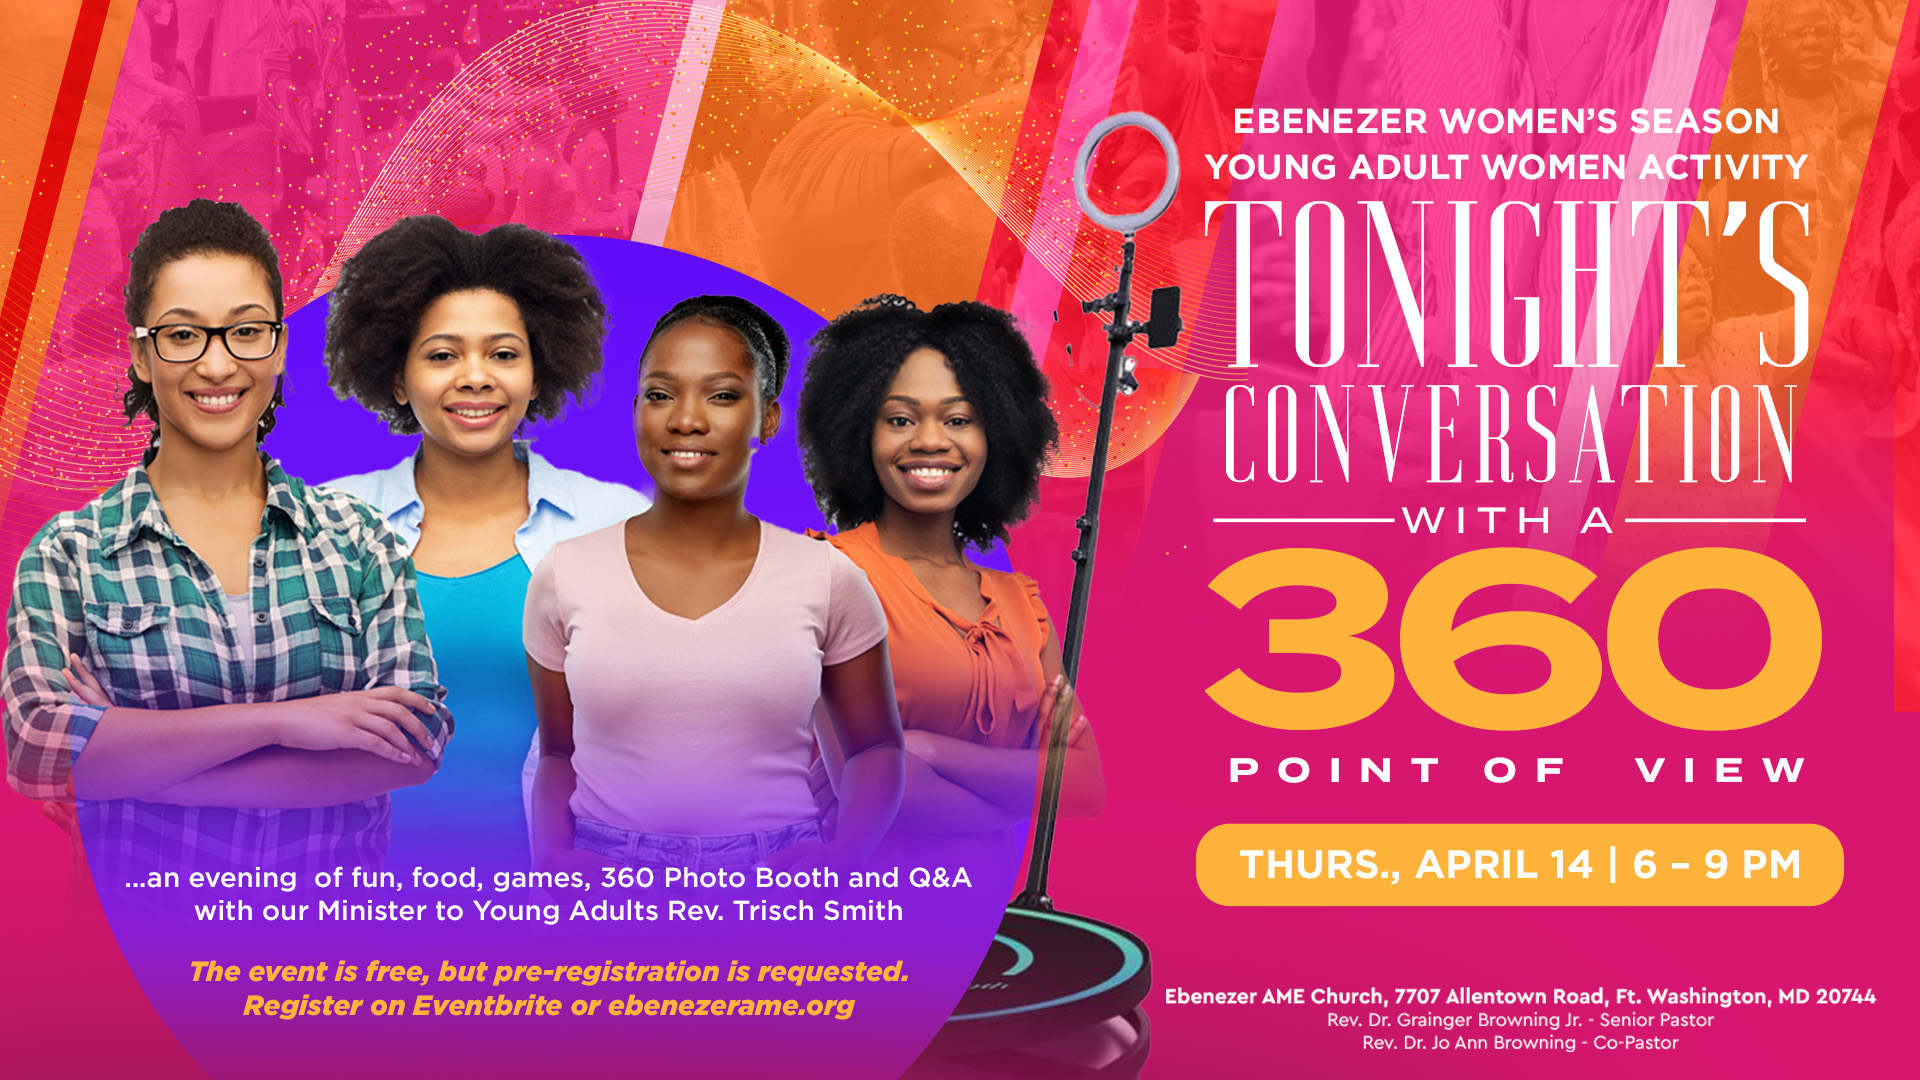 Young Adult Women 360 event